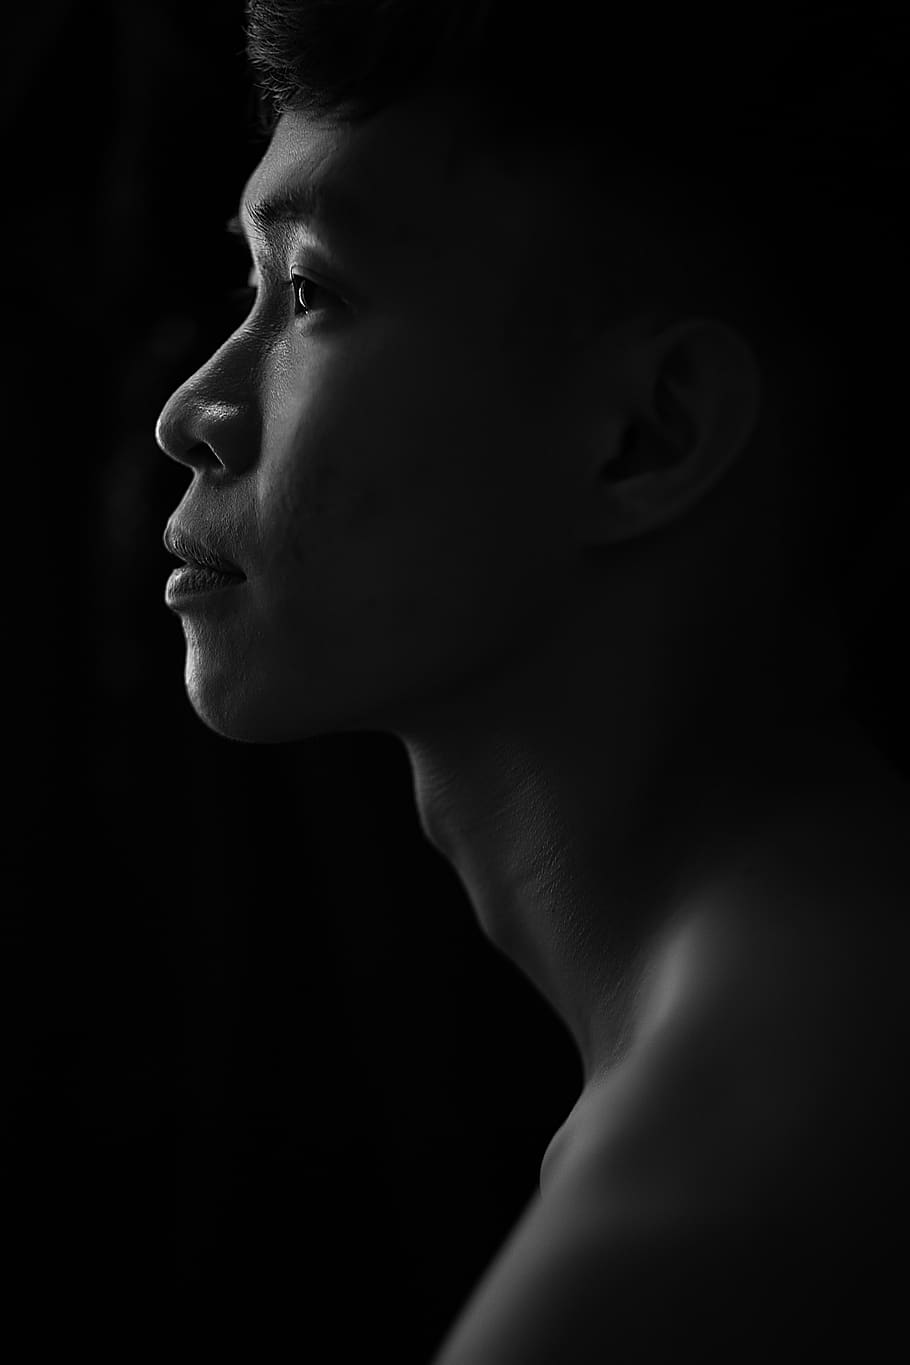 portrait, man, person, boy, masculine, face, shadow, one person, headshot, looking away